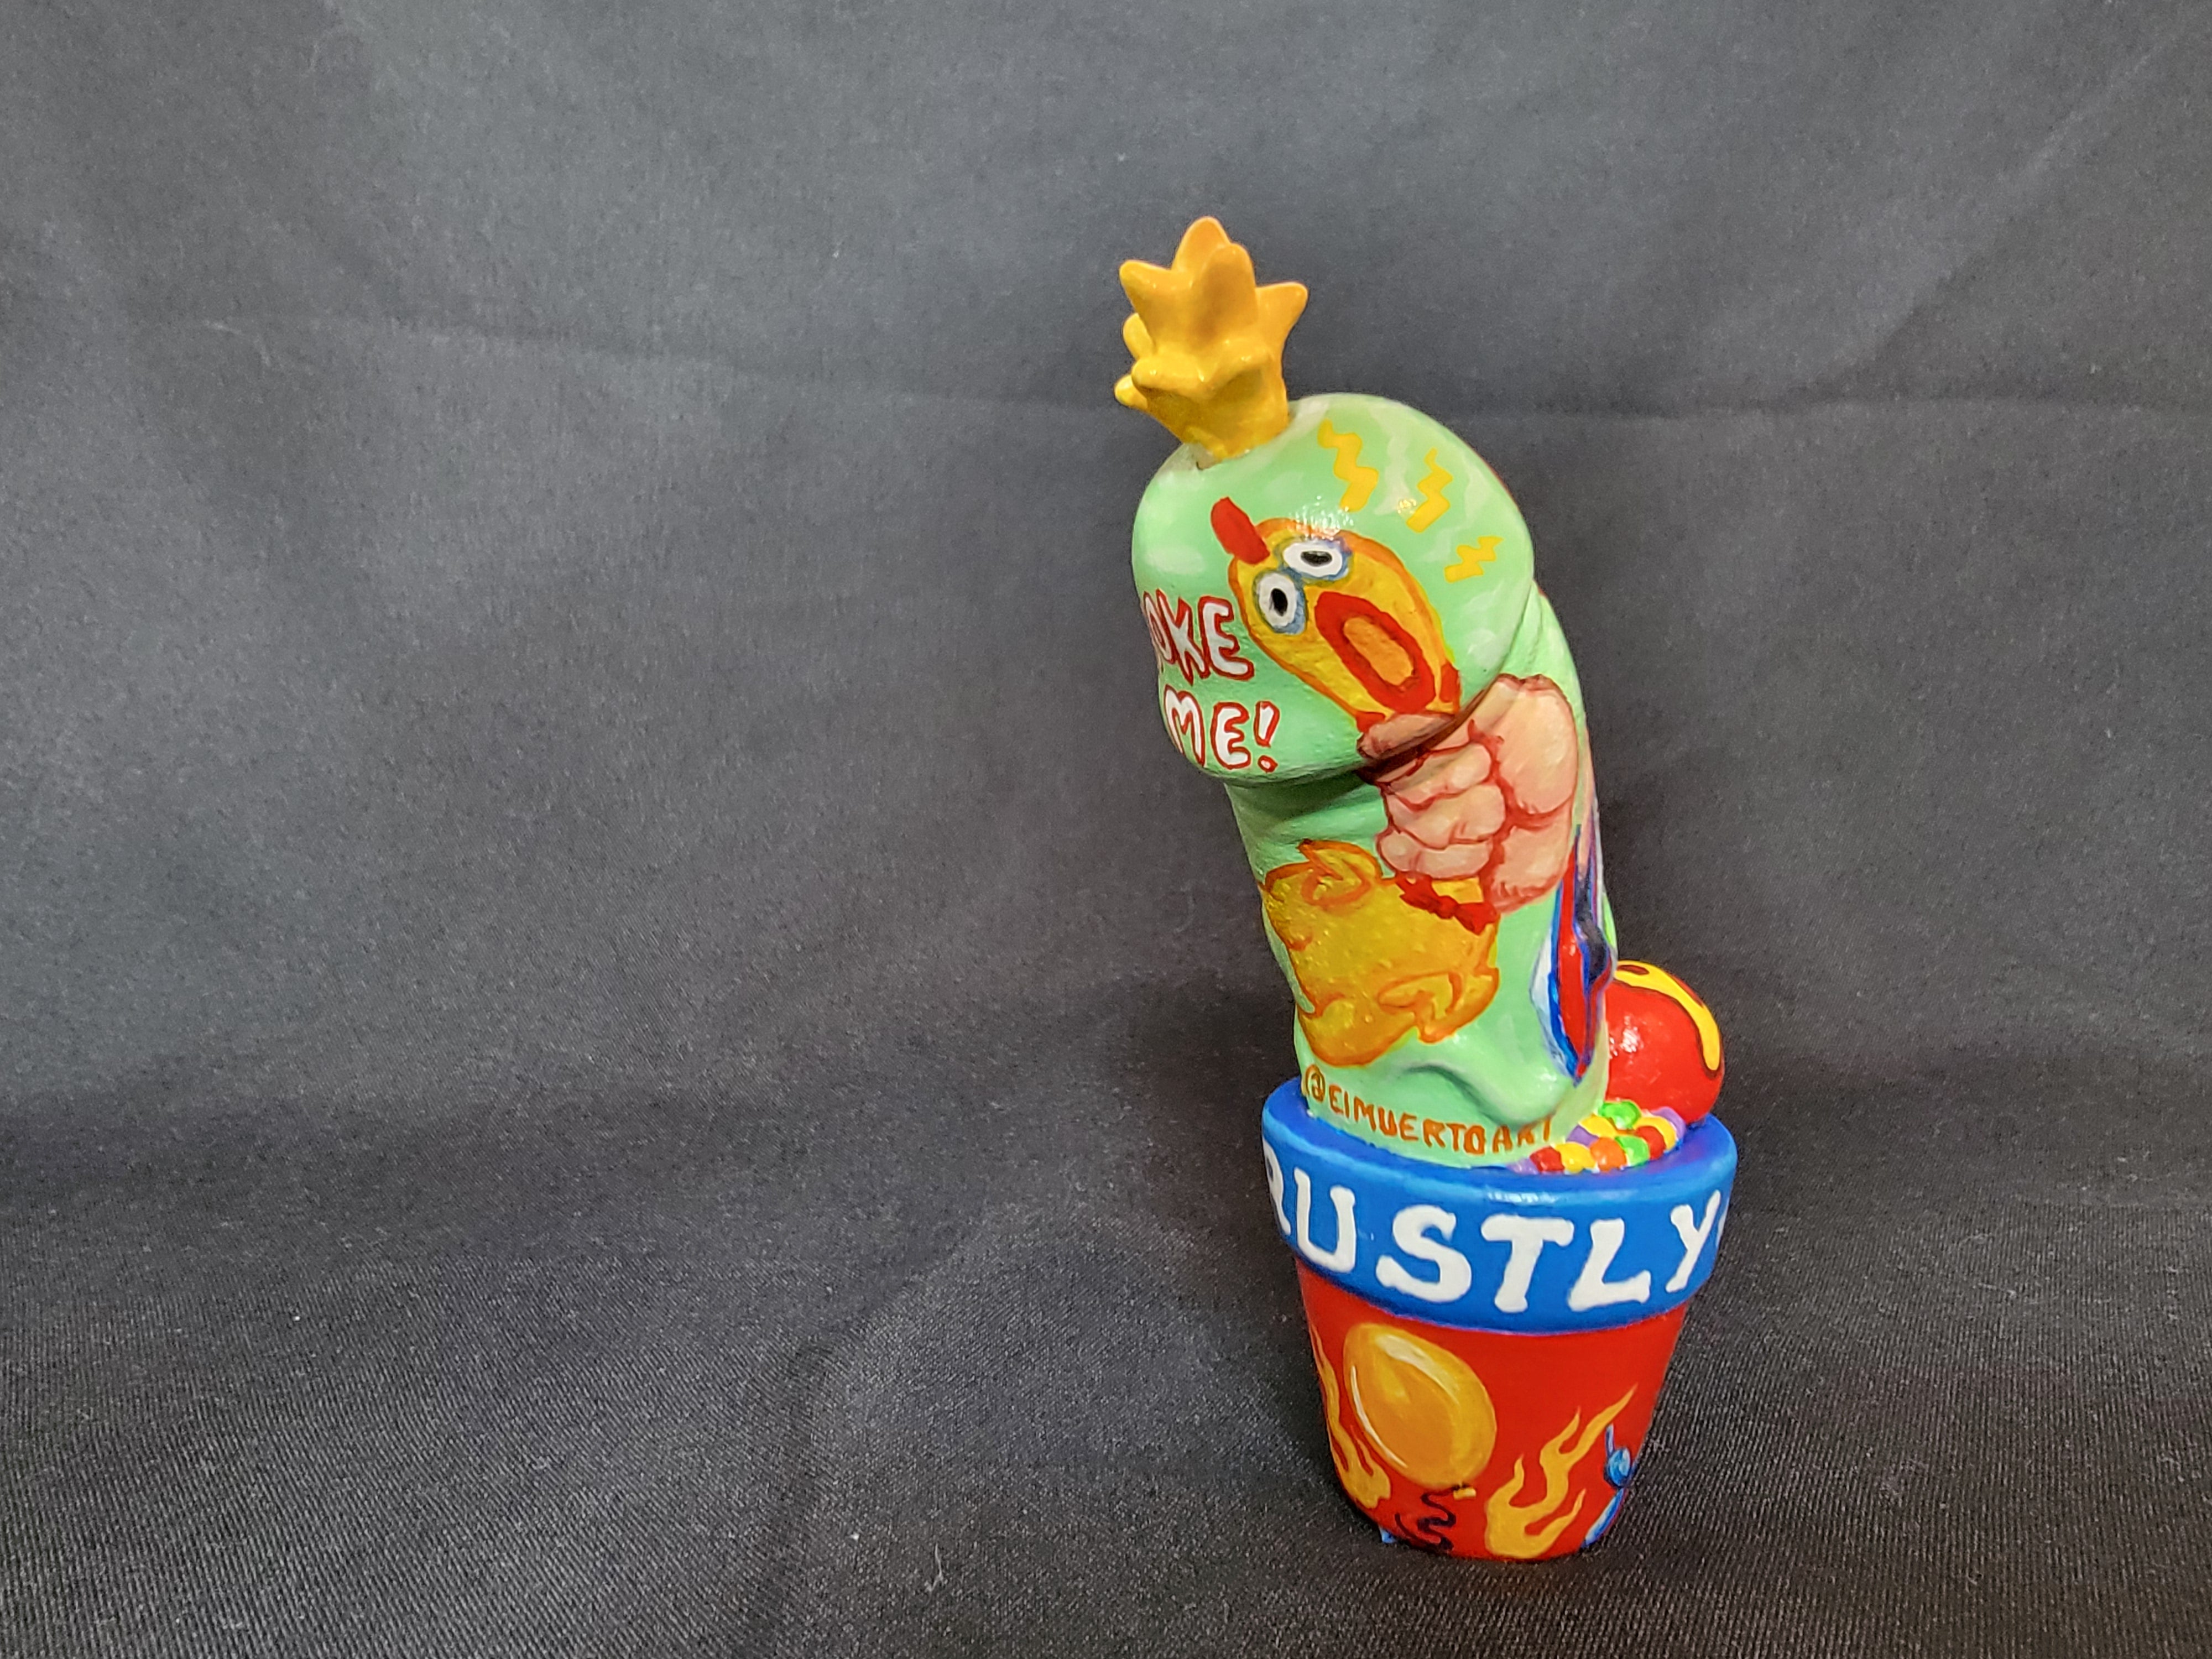 Toy chicken sculpture on surface, painted ice cream container, close-up of body and fabric, cartoon and fast food elements.